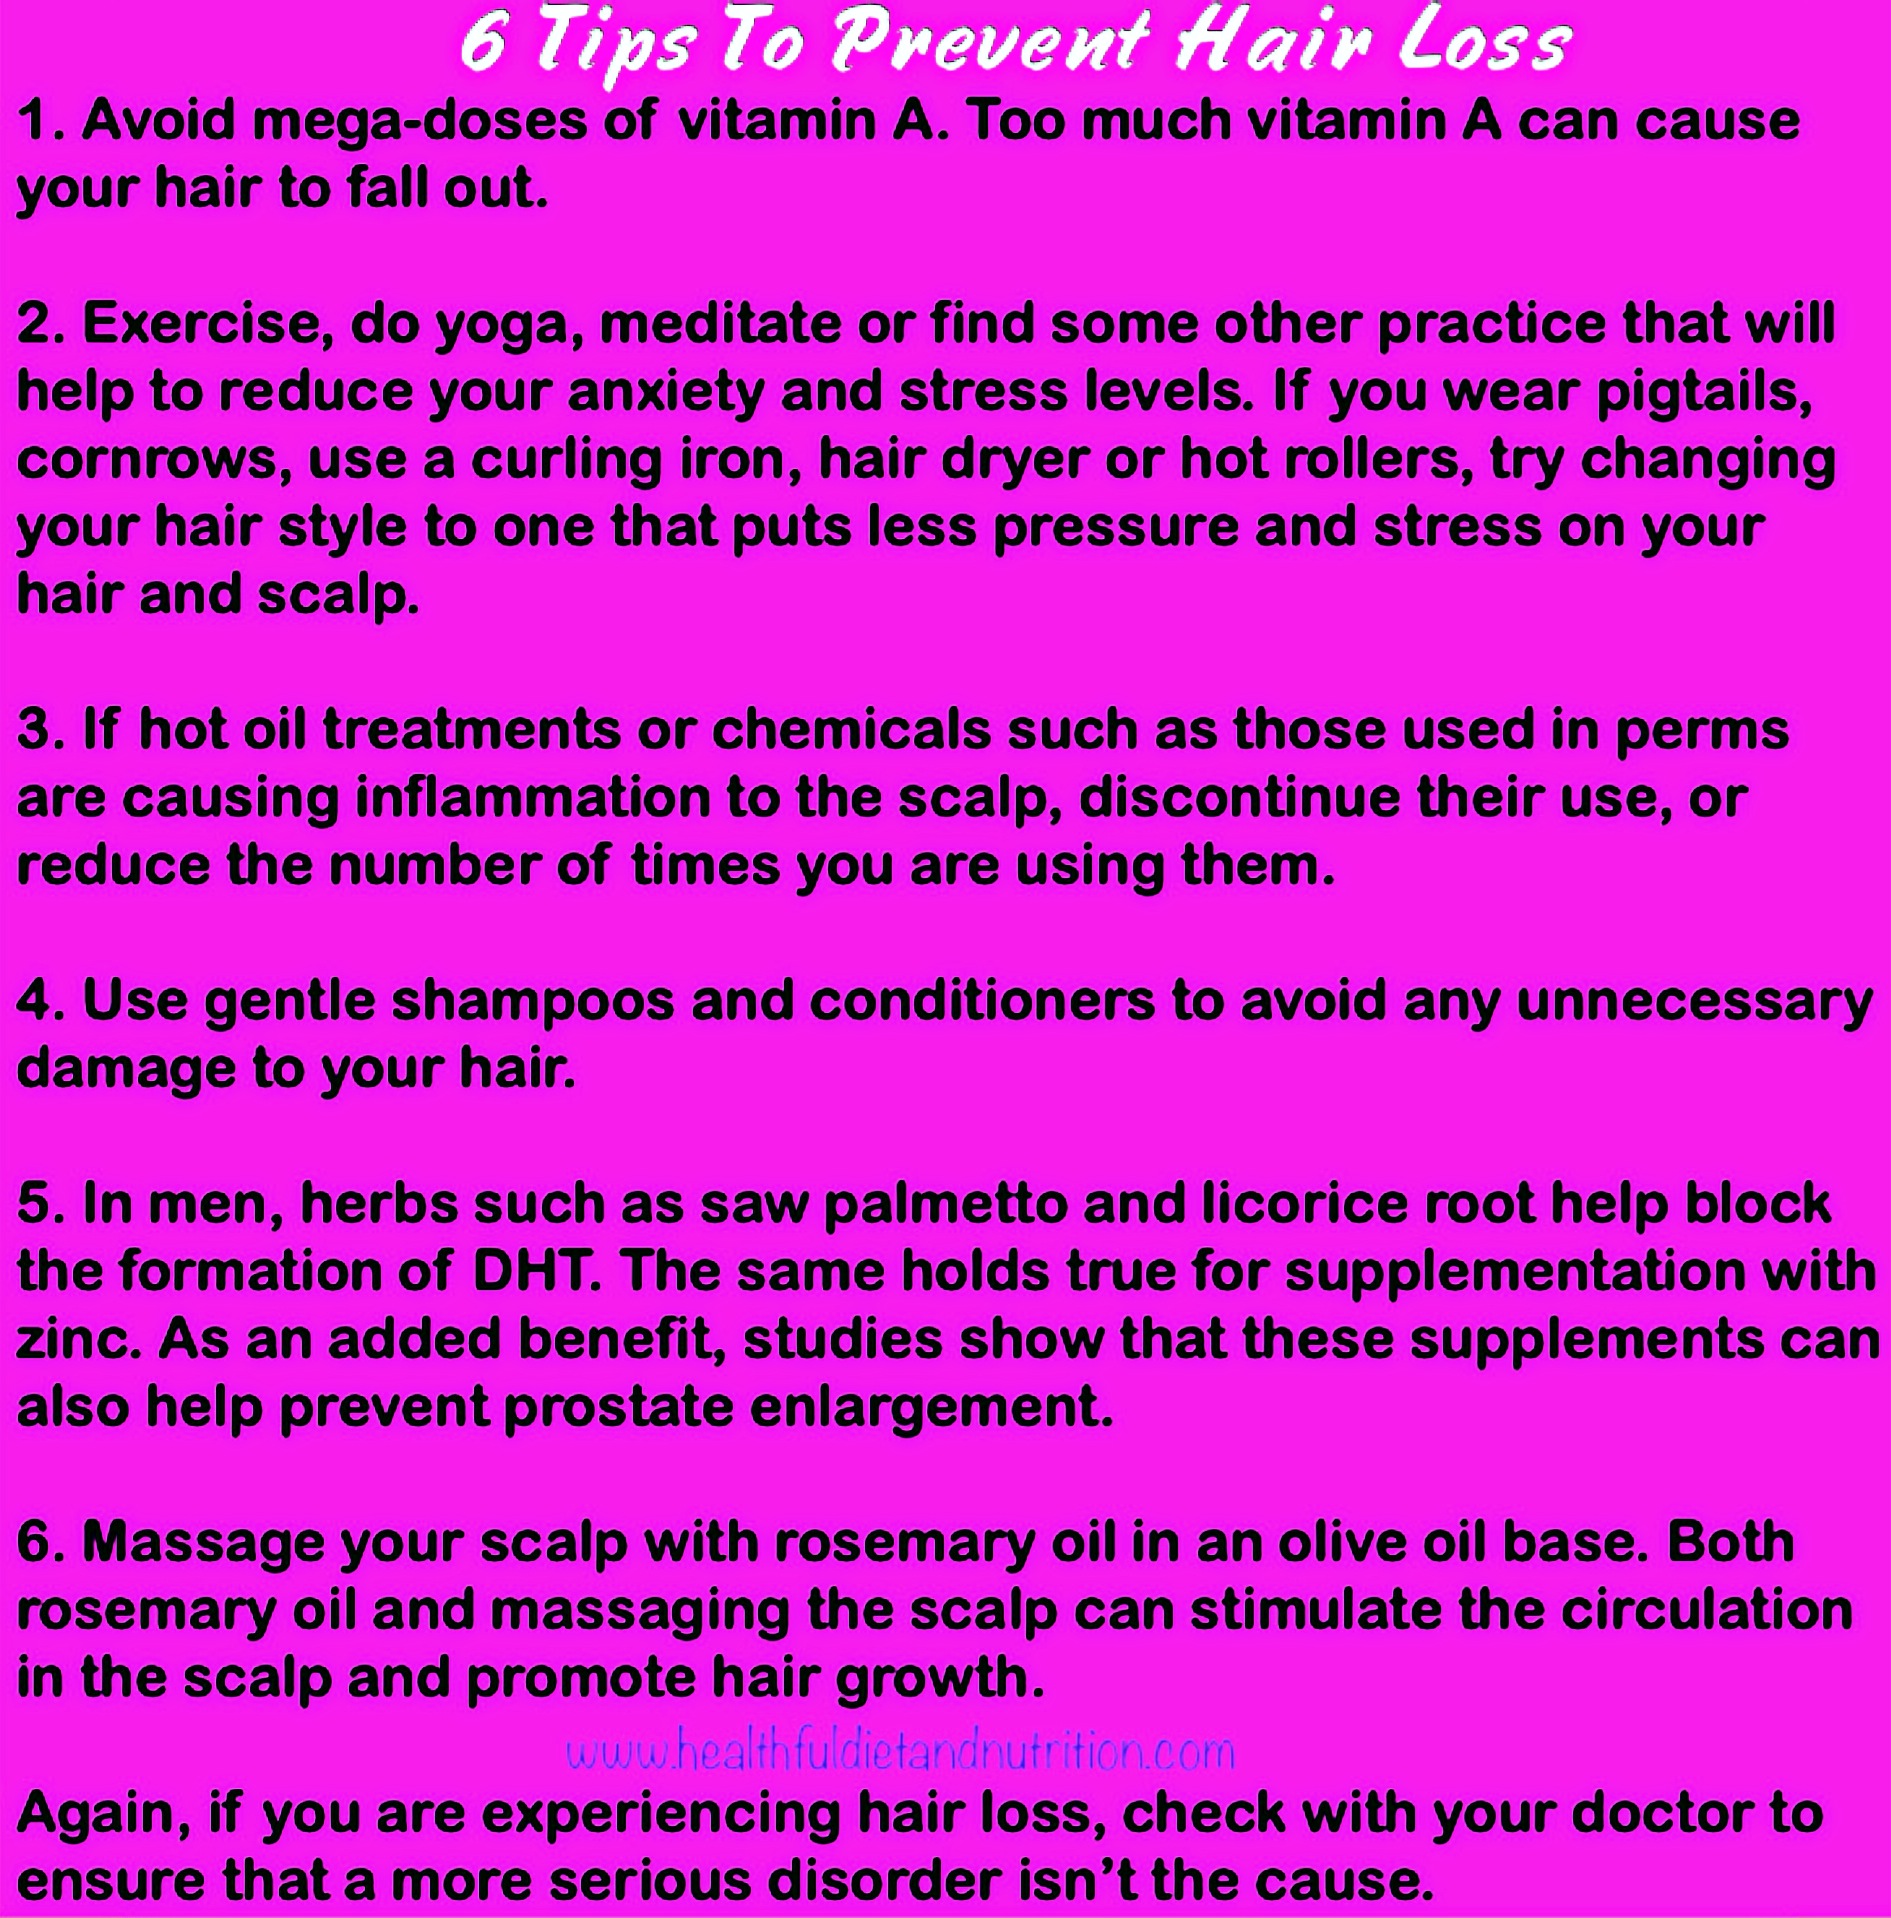 6 Tips To Prevent Hair Loss